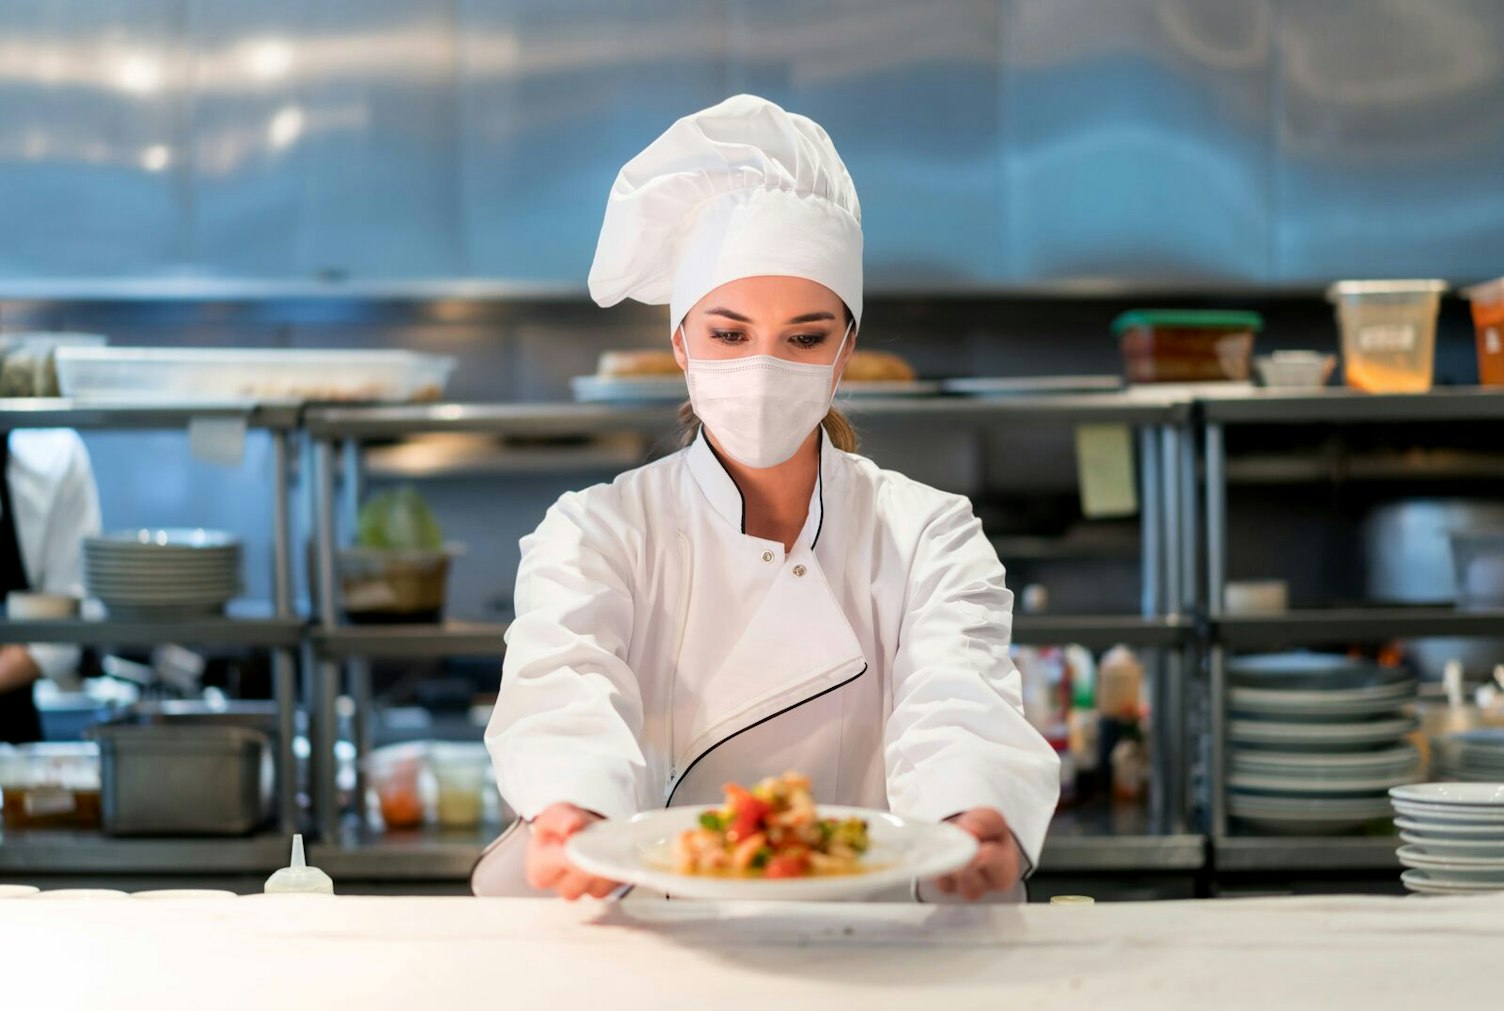 Woman Chef Working at a Restaurant Wearing Face Mask